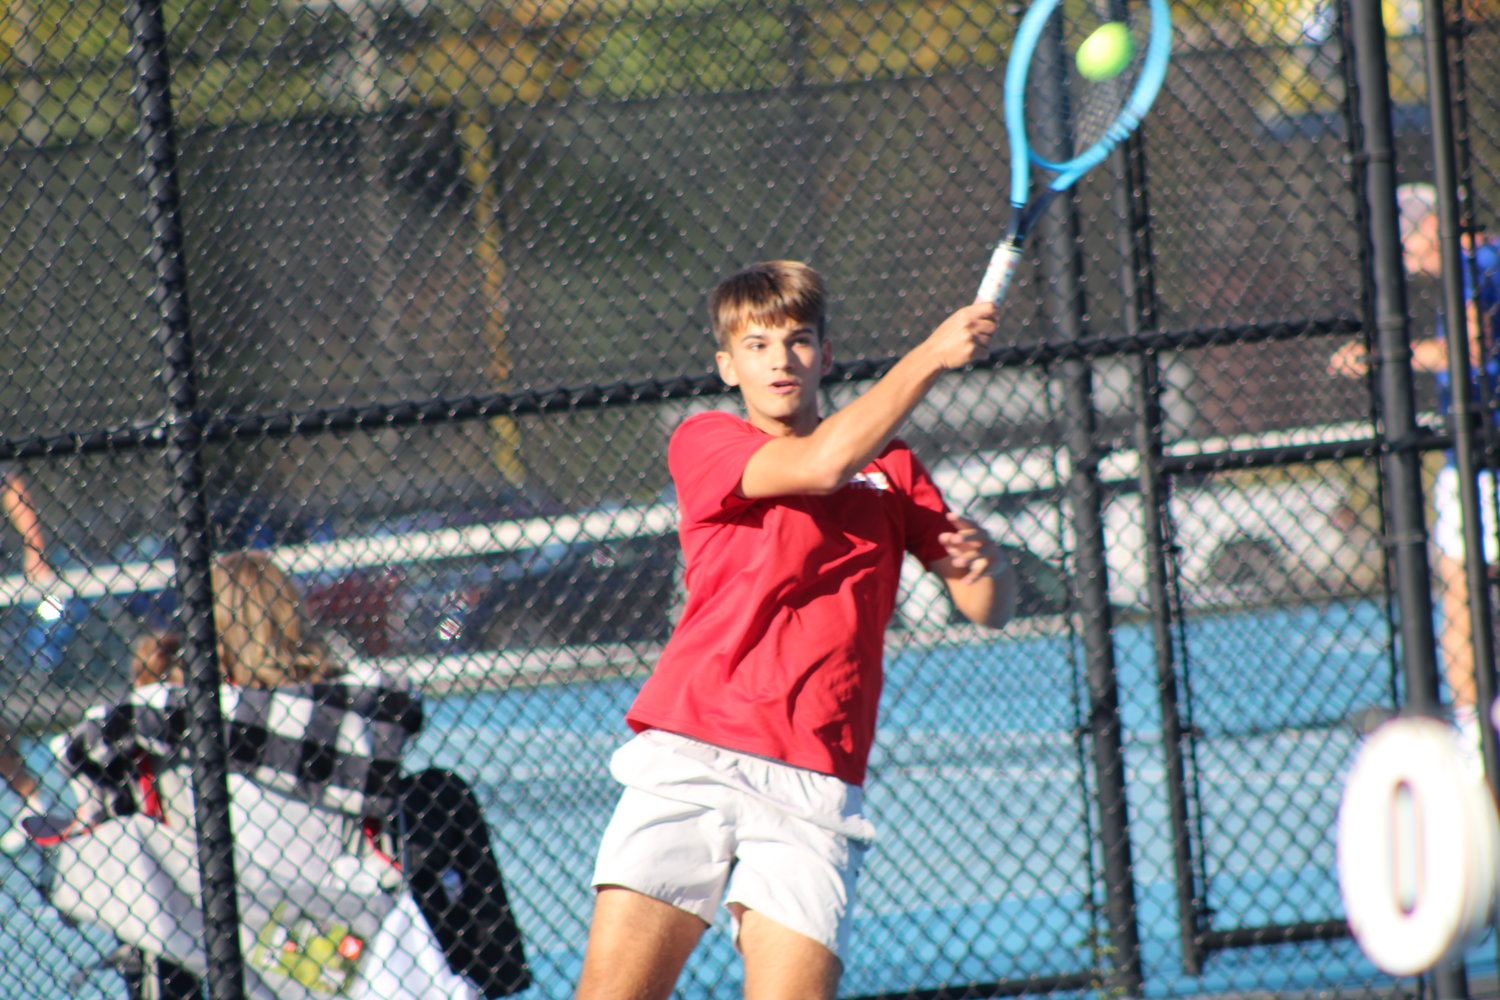 Southmont's Adam Cox continued his unblemished senior season by improving to 20-0 with a win over Seeger's Thomas Lemming.